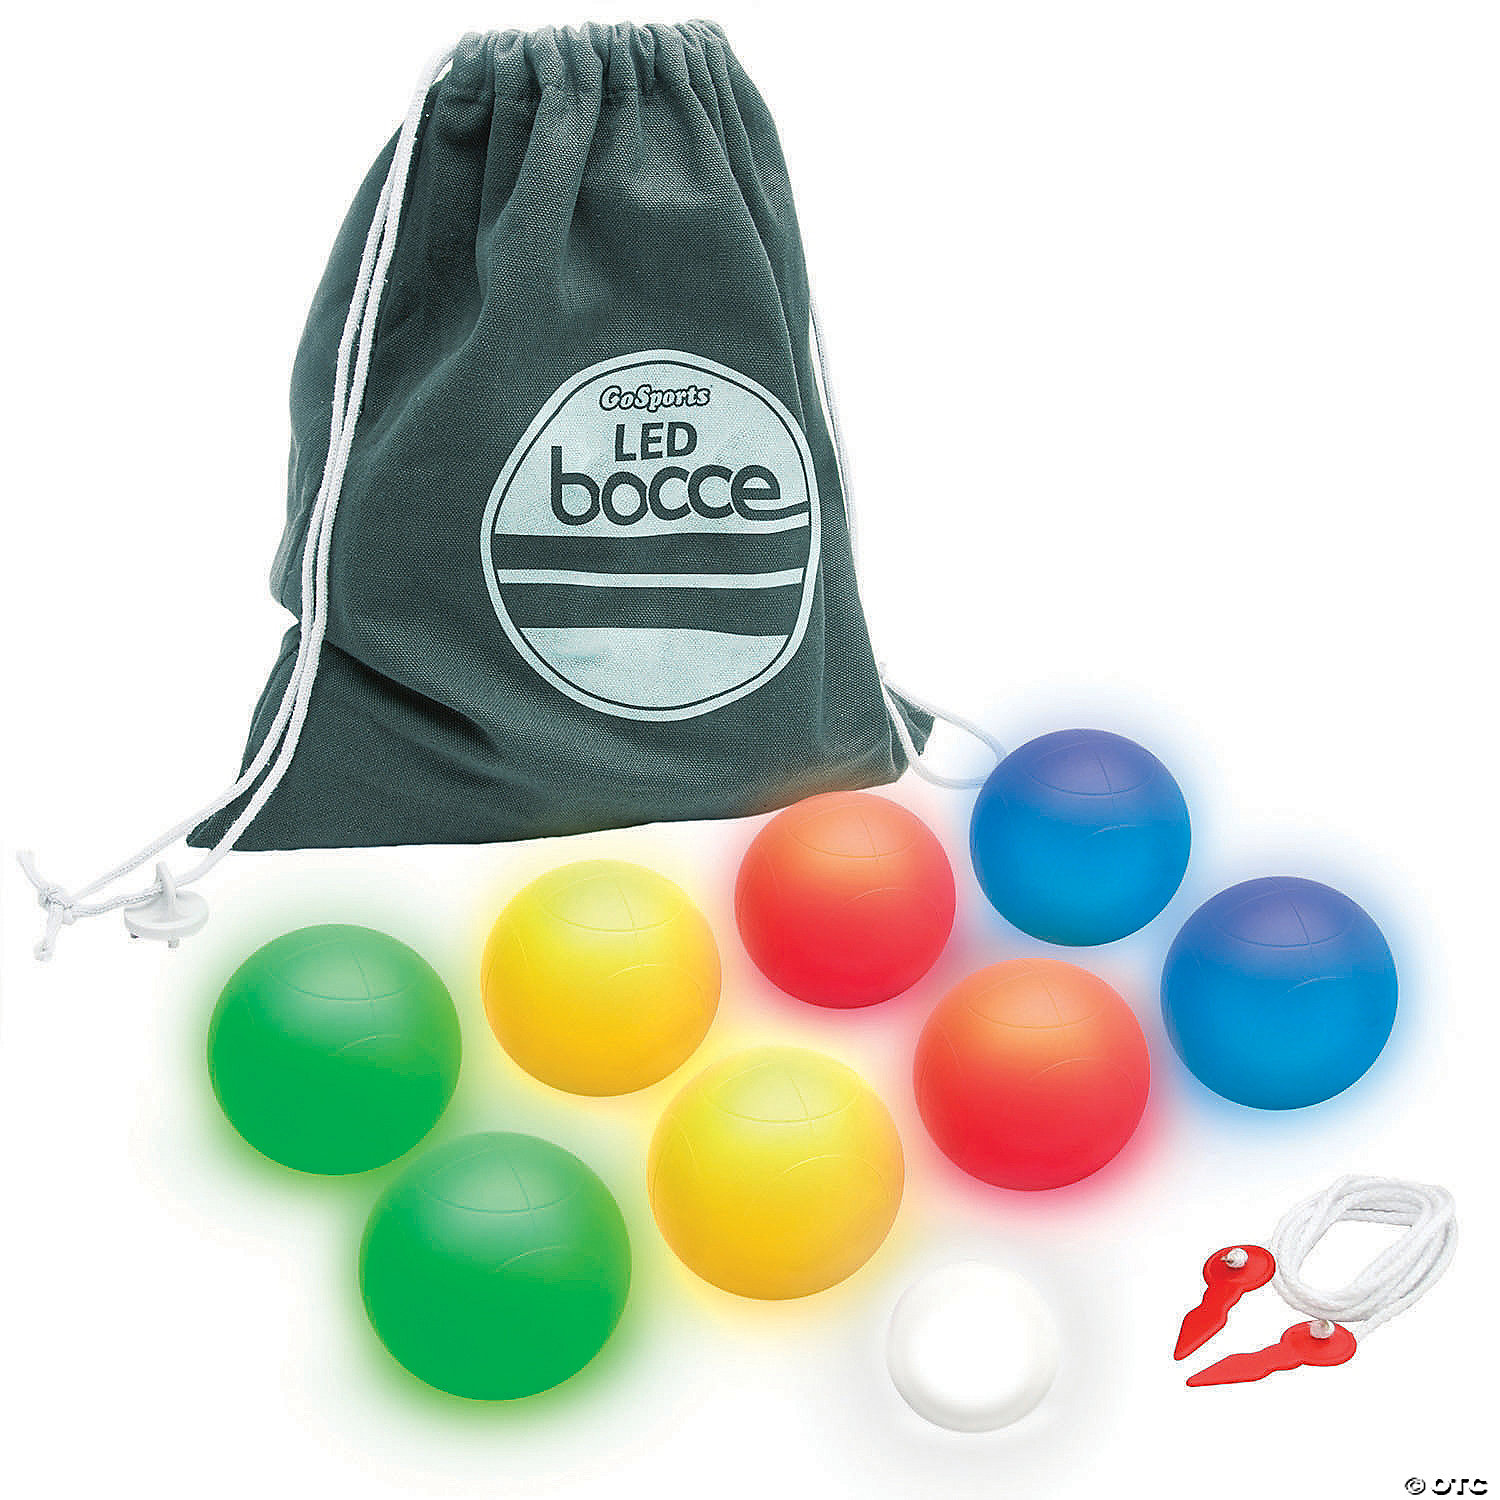 https://s7.orientaltrading.com/is/image/OrientalTrading/VIEWER_ZOOM/gosports-85mm-led-bocce-ball-game-set-includes-8-light-up-bocce-balls-8-5oz-each-pallino-case-and-measuring-rope~14111117